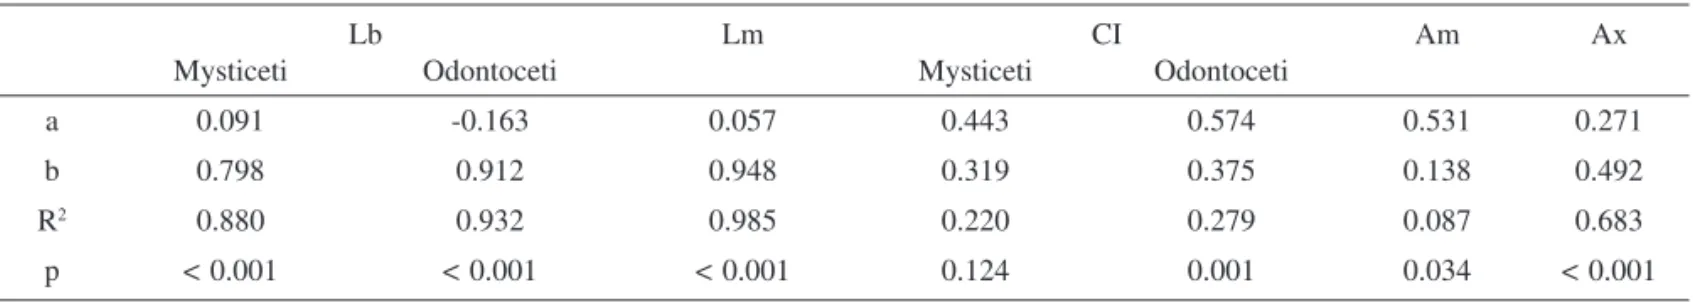 Table 2. Coeffi cient of allometry regression to Lx in cetaceans, logY = a + blogLx, where Y represents Lb, Lm, CI, Am and Ax